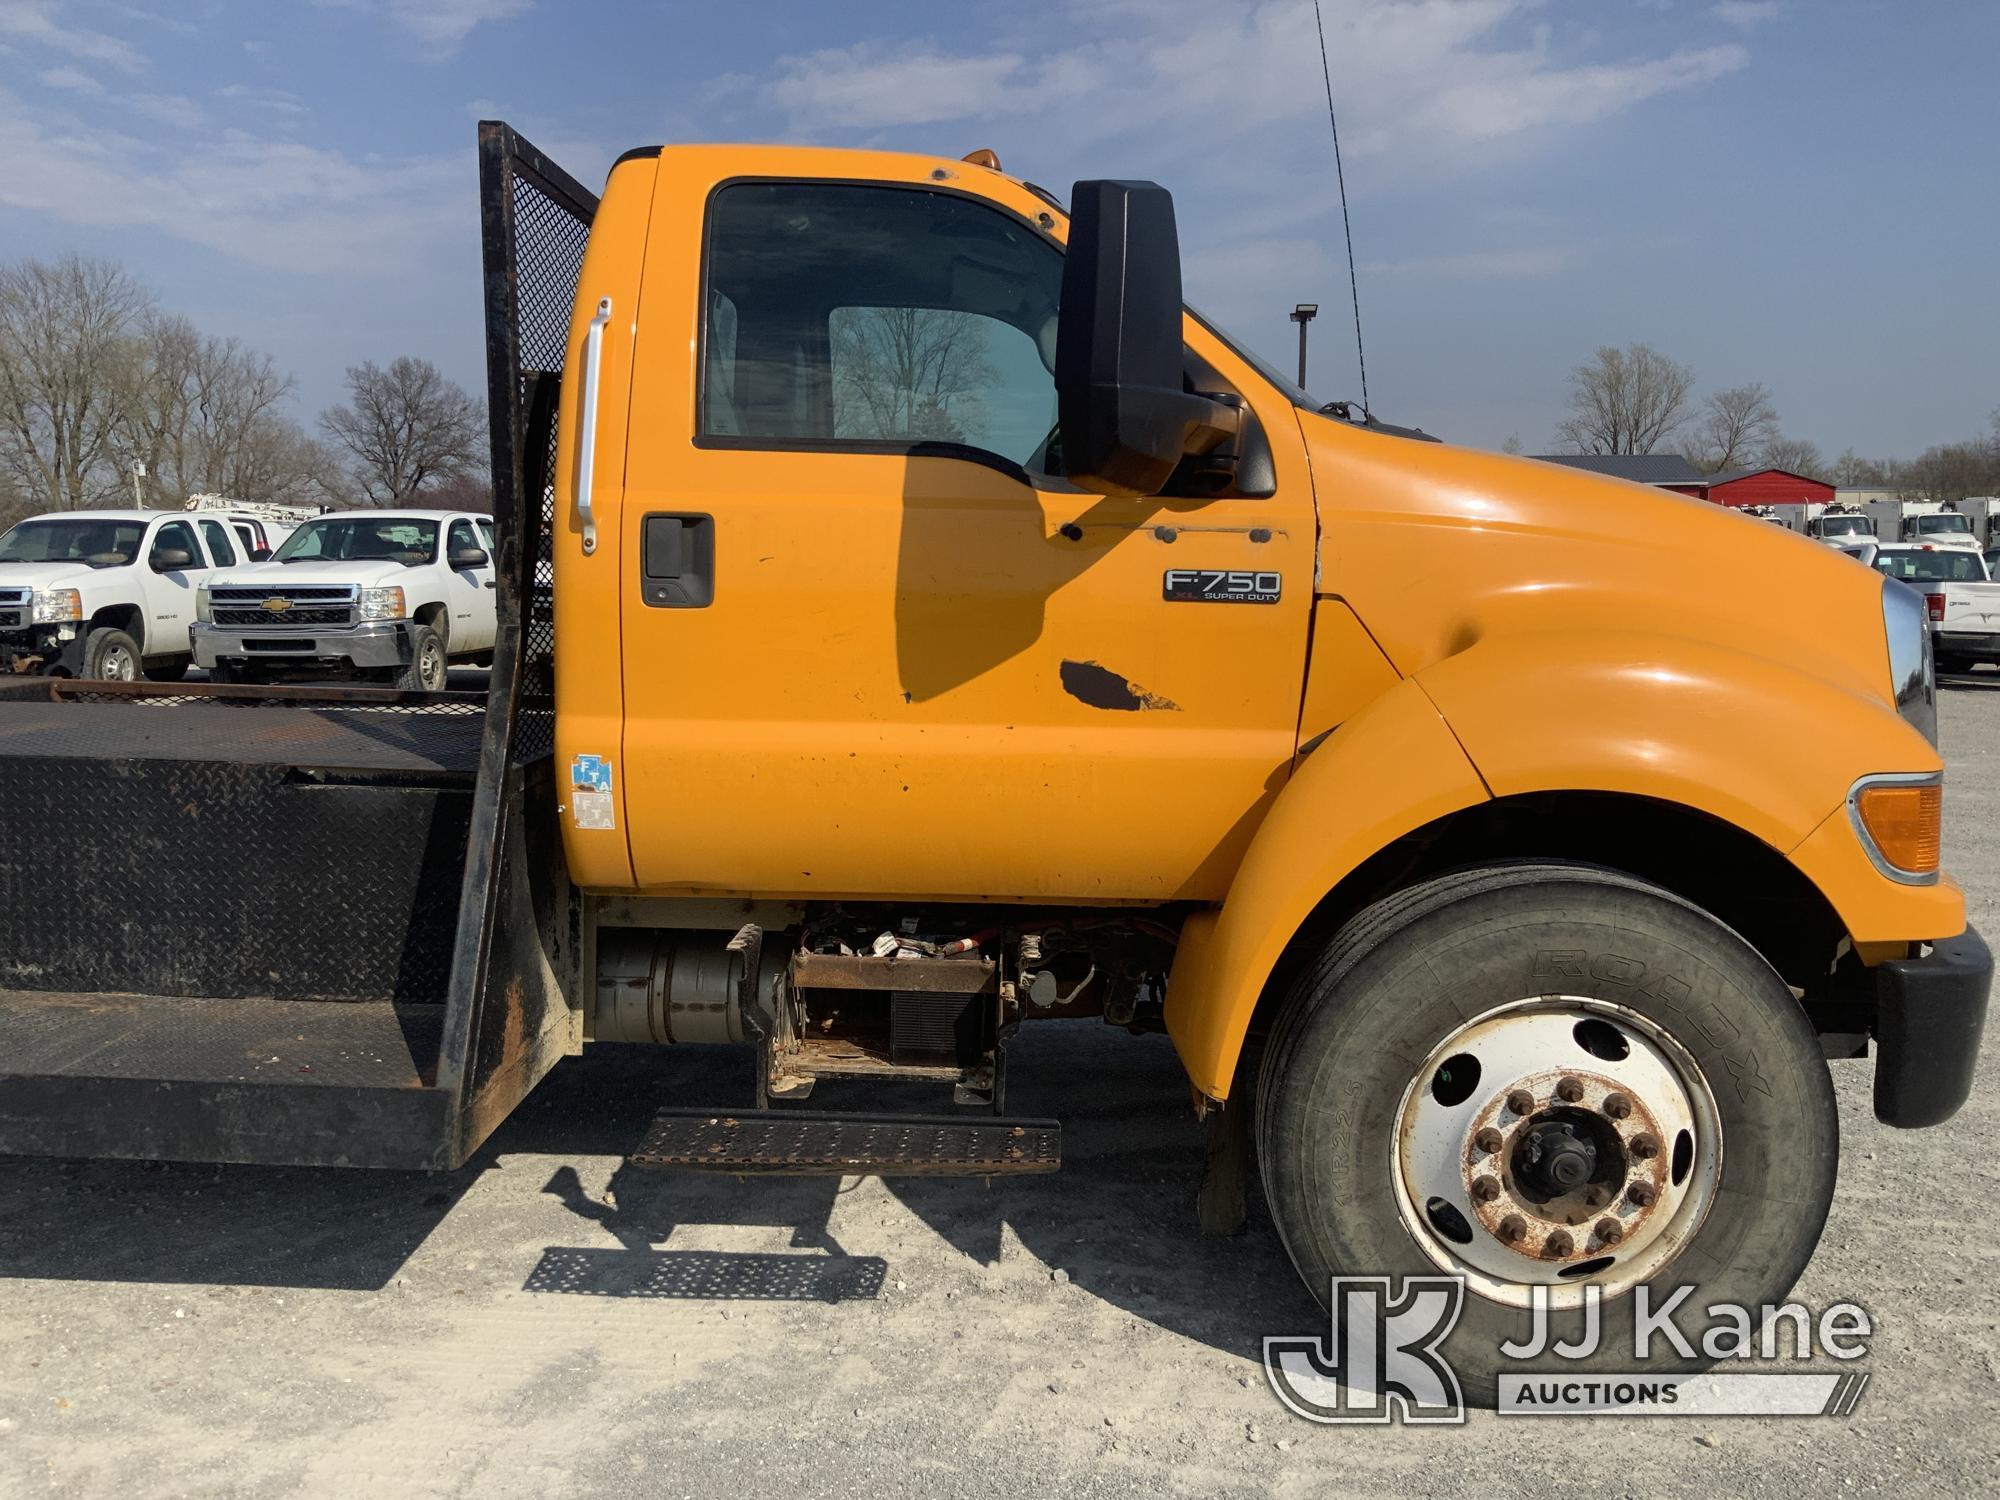 (Hawk Point, MO) 2013 Ford F750 Flatbed Truck Runs & Moves) (Check Engine Light On, Missing Headligh